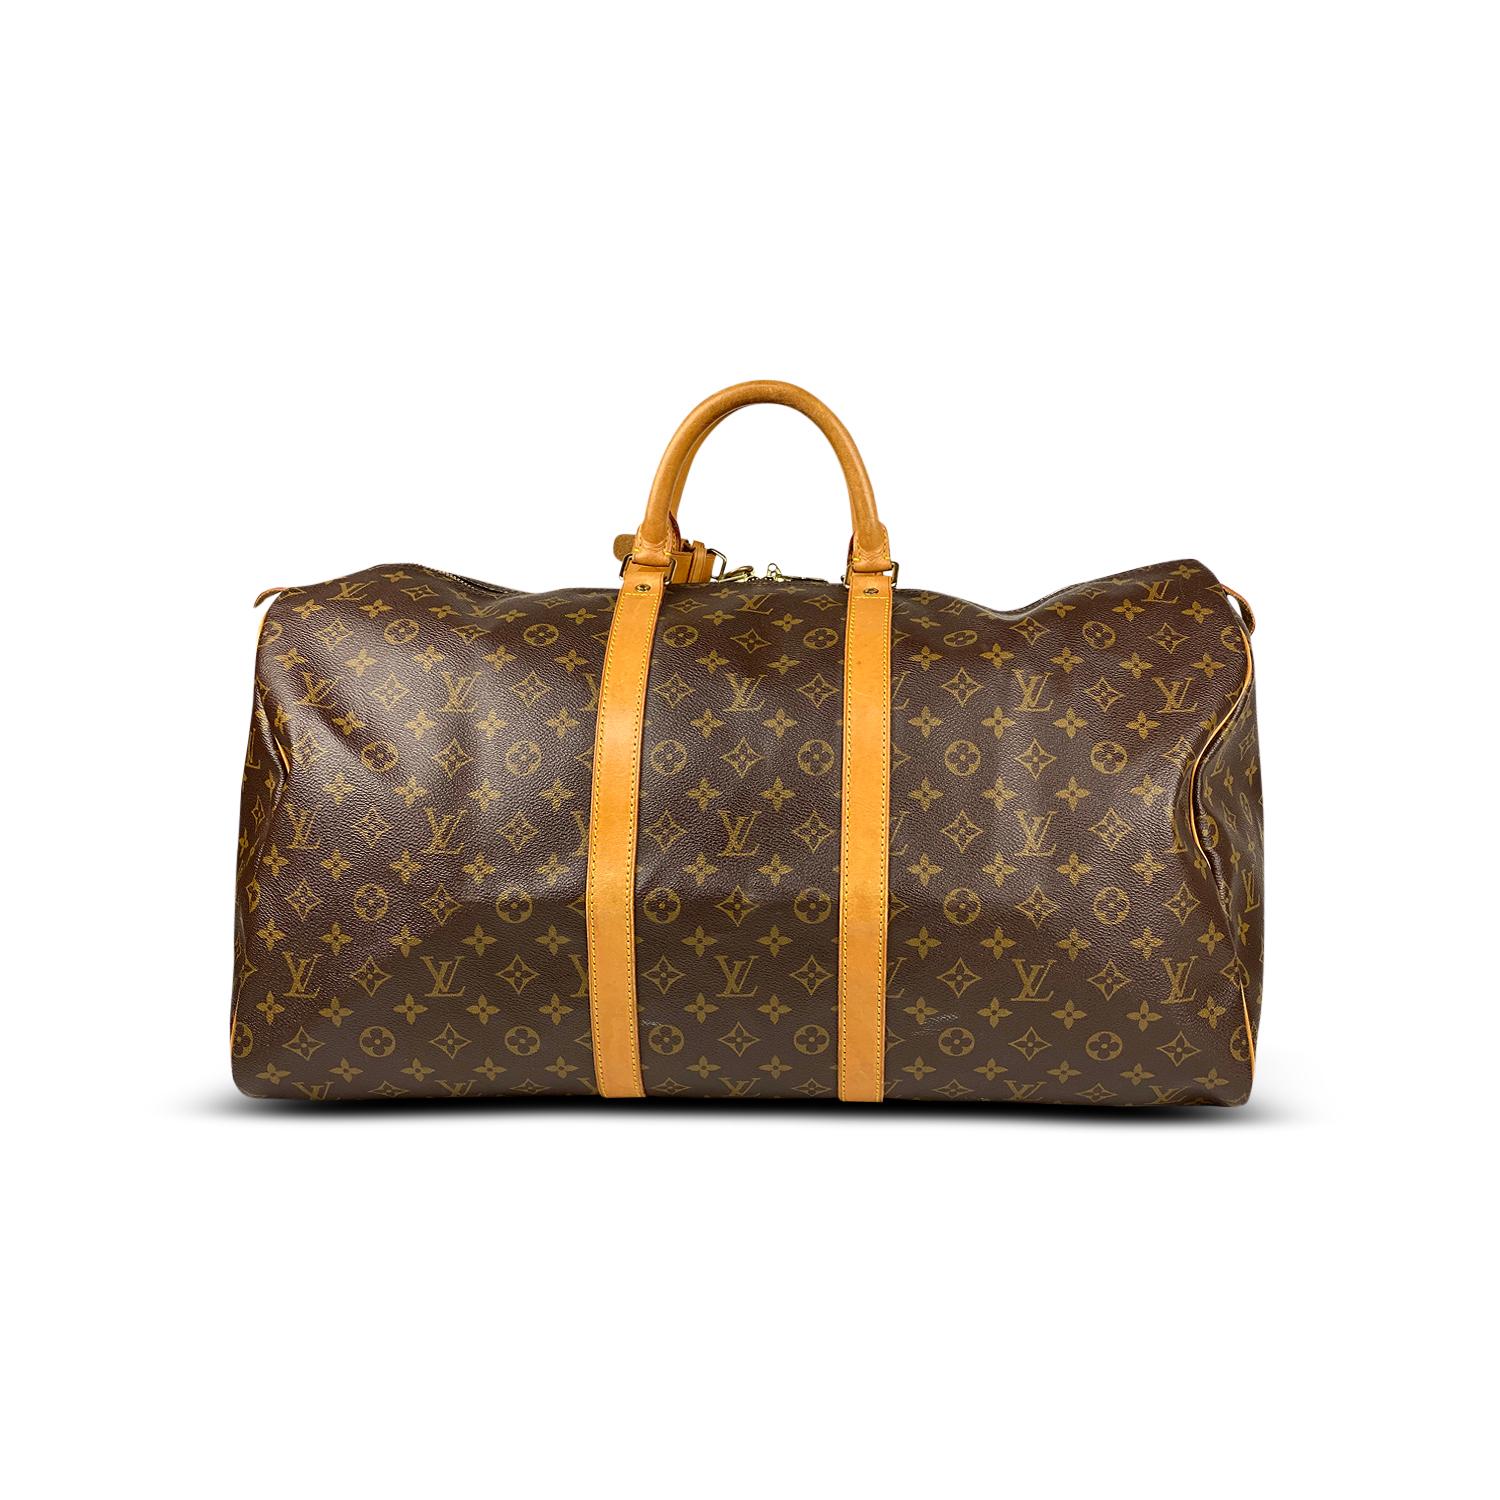 Louis Vuitton Monogram Keepall 55 Weekend Bag In Good Condition For Sale In Sundbyberg, SE